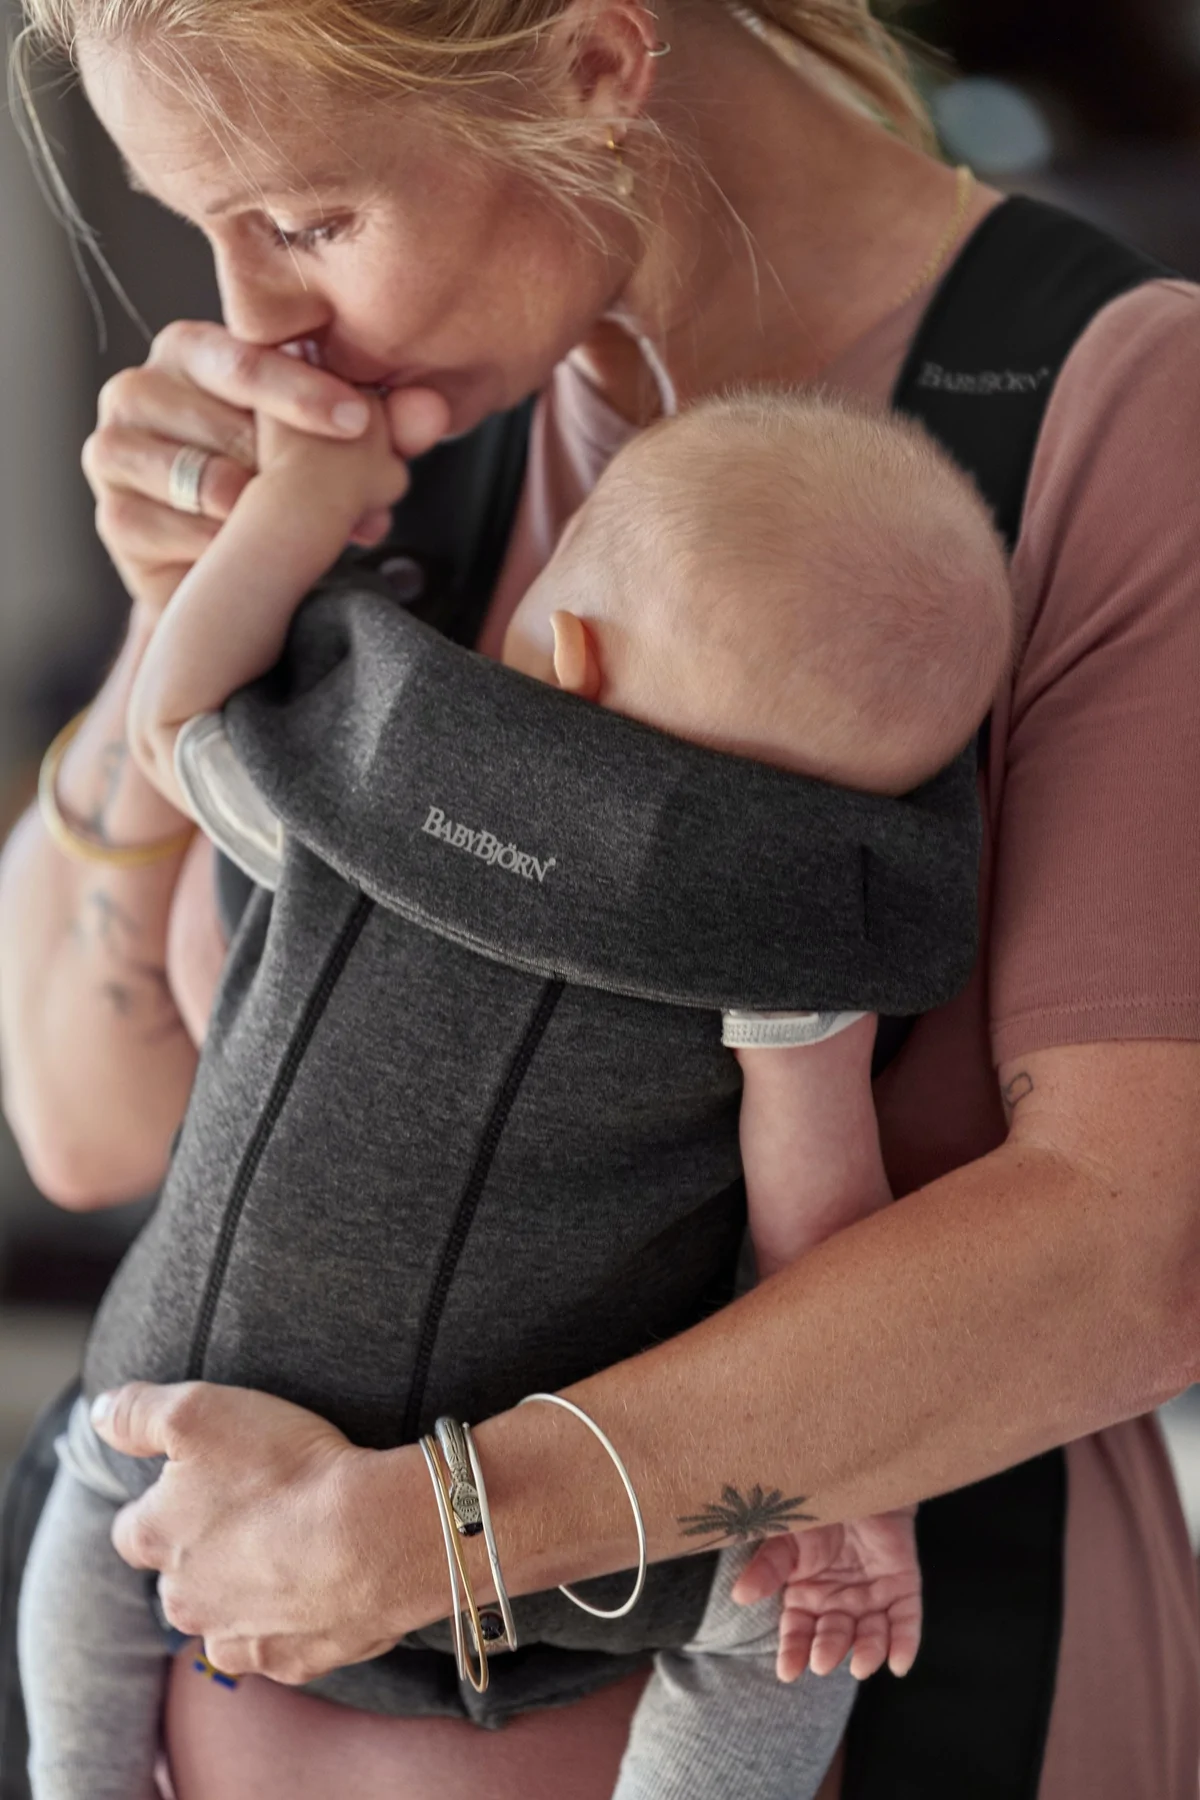 021076 baby carrier mini charcoal grey 3d jersey lifestyle 08 1 1800x1800